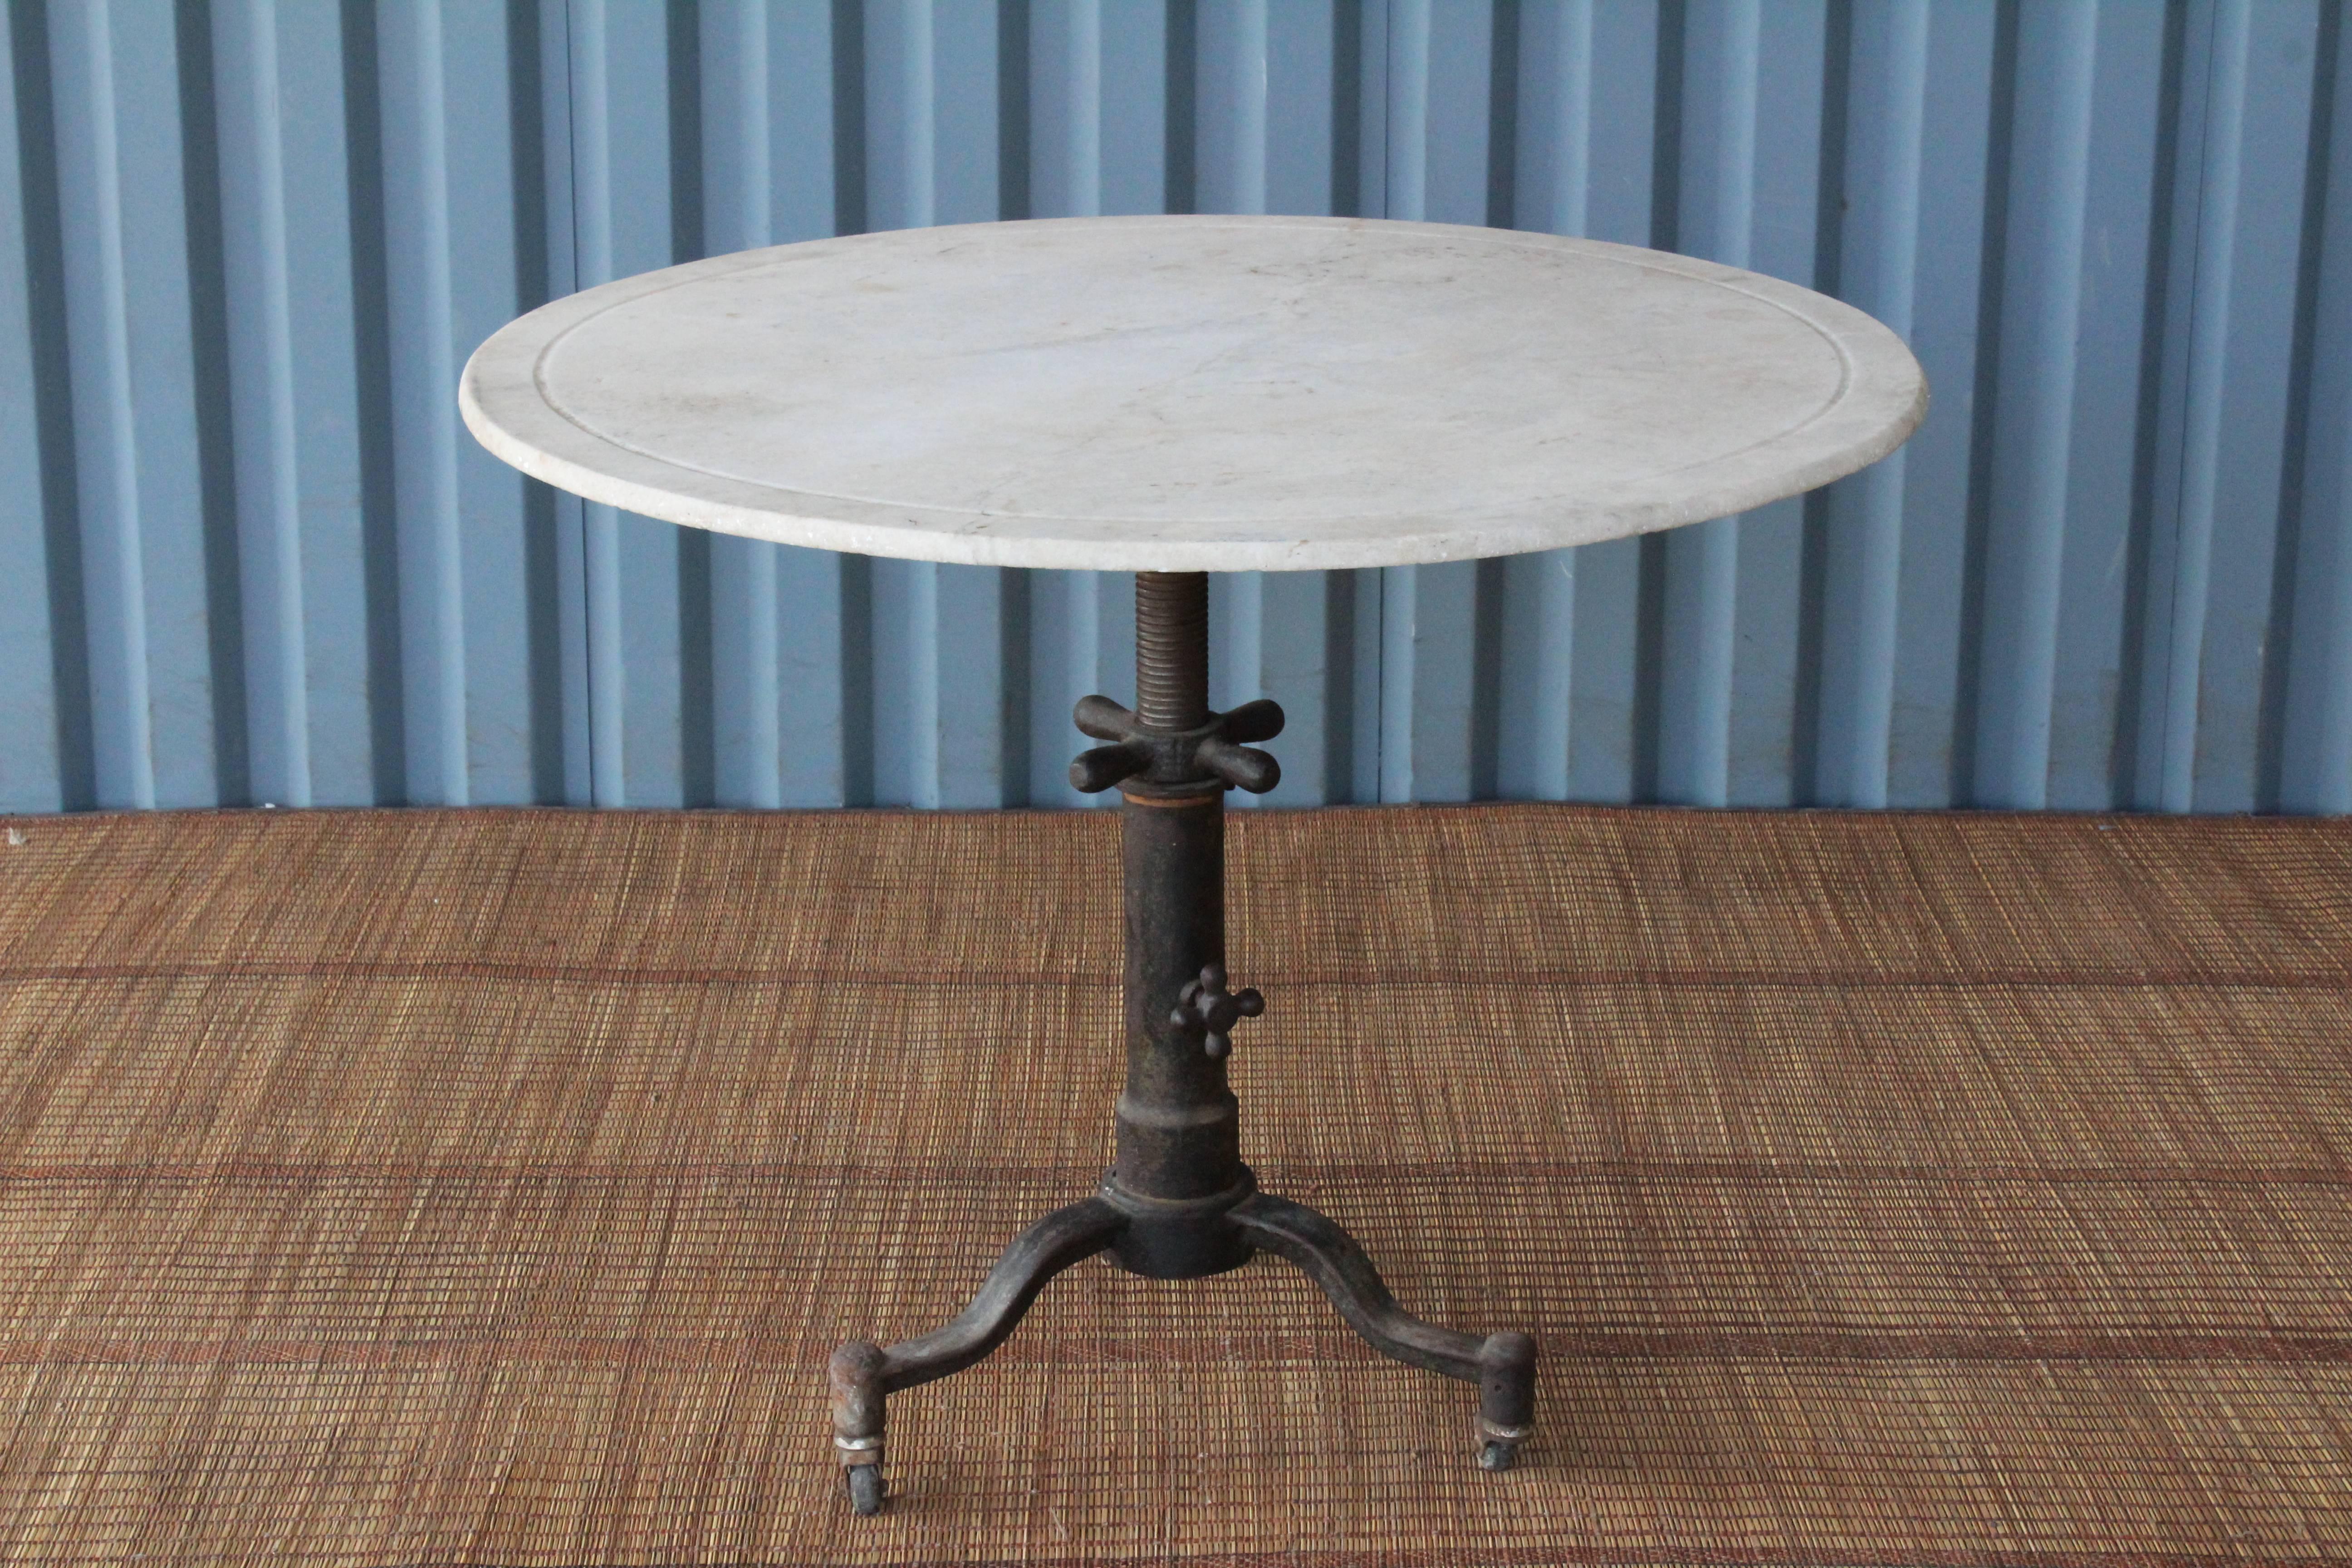 1920s Industrial cast iron table base on rolling casters with an antique marble top. This table is height adjustable and can be used anywhere between 25.5 inches high to 30 inches high. Marble top has age appropriate patina. Table base has slight